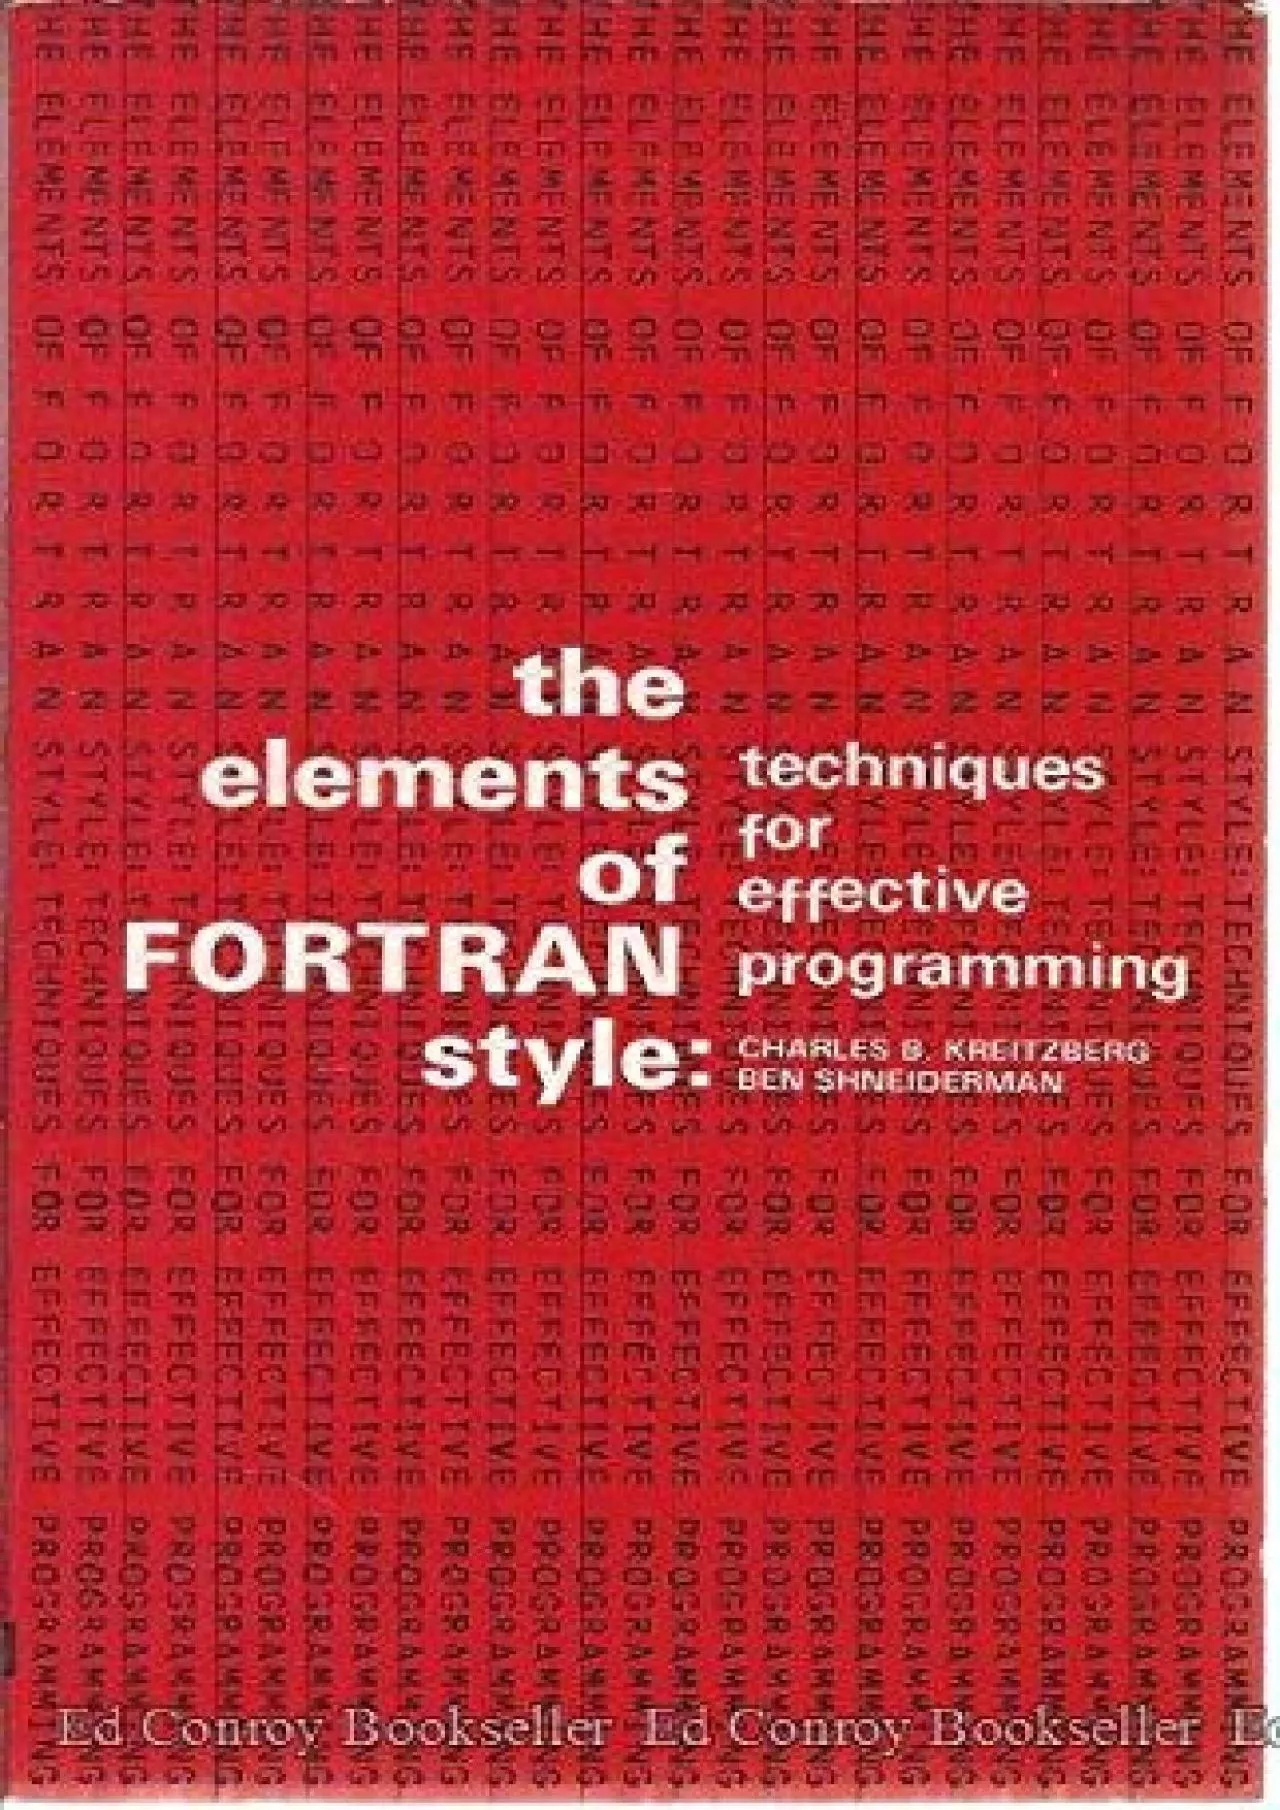 [BEST]-Elements of Fortran Style